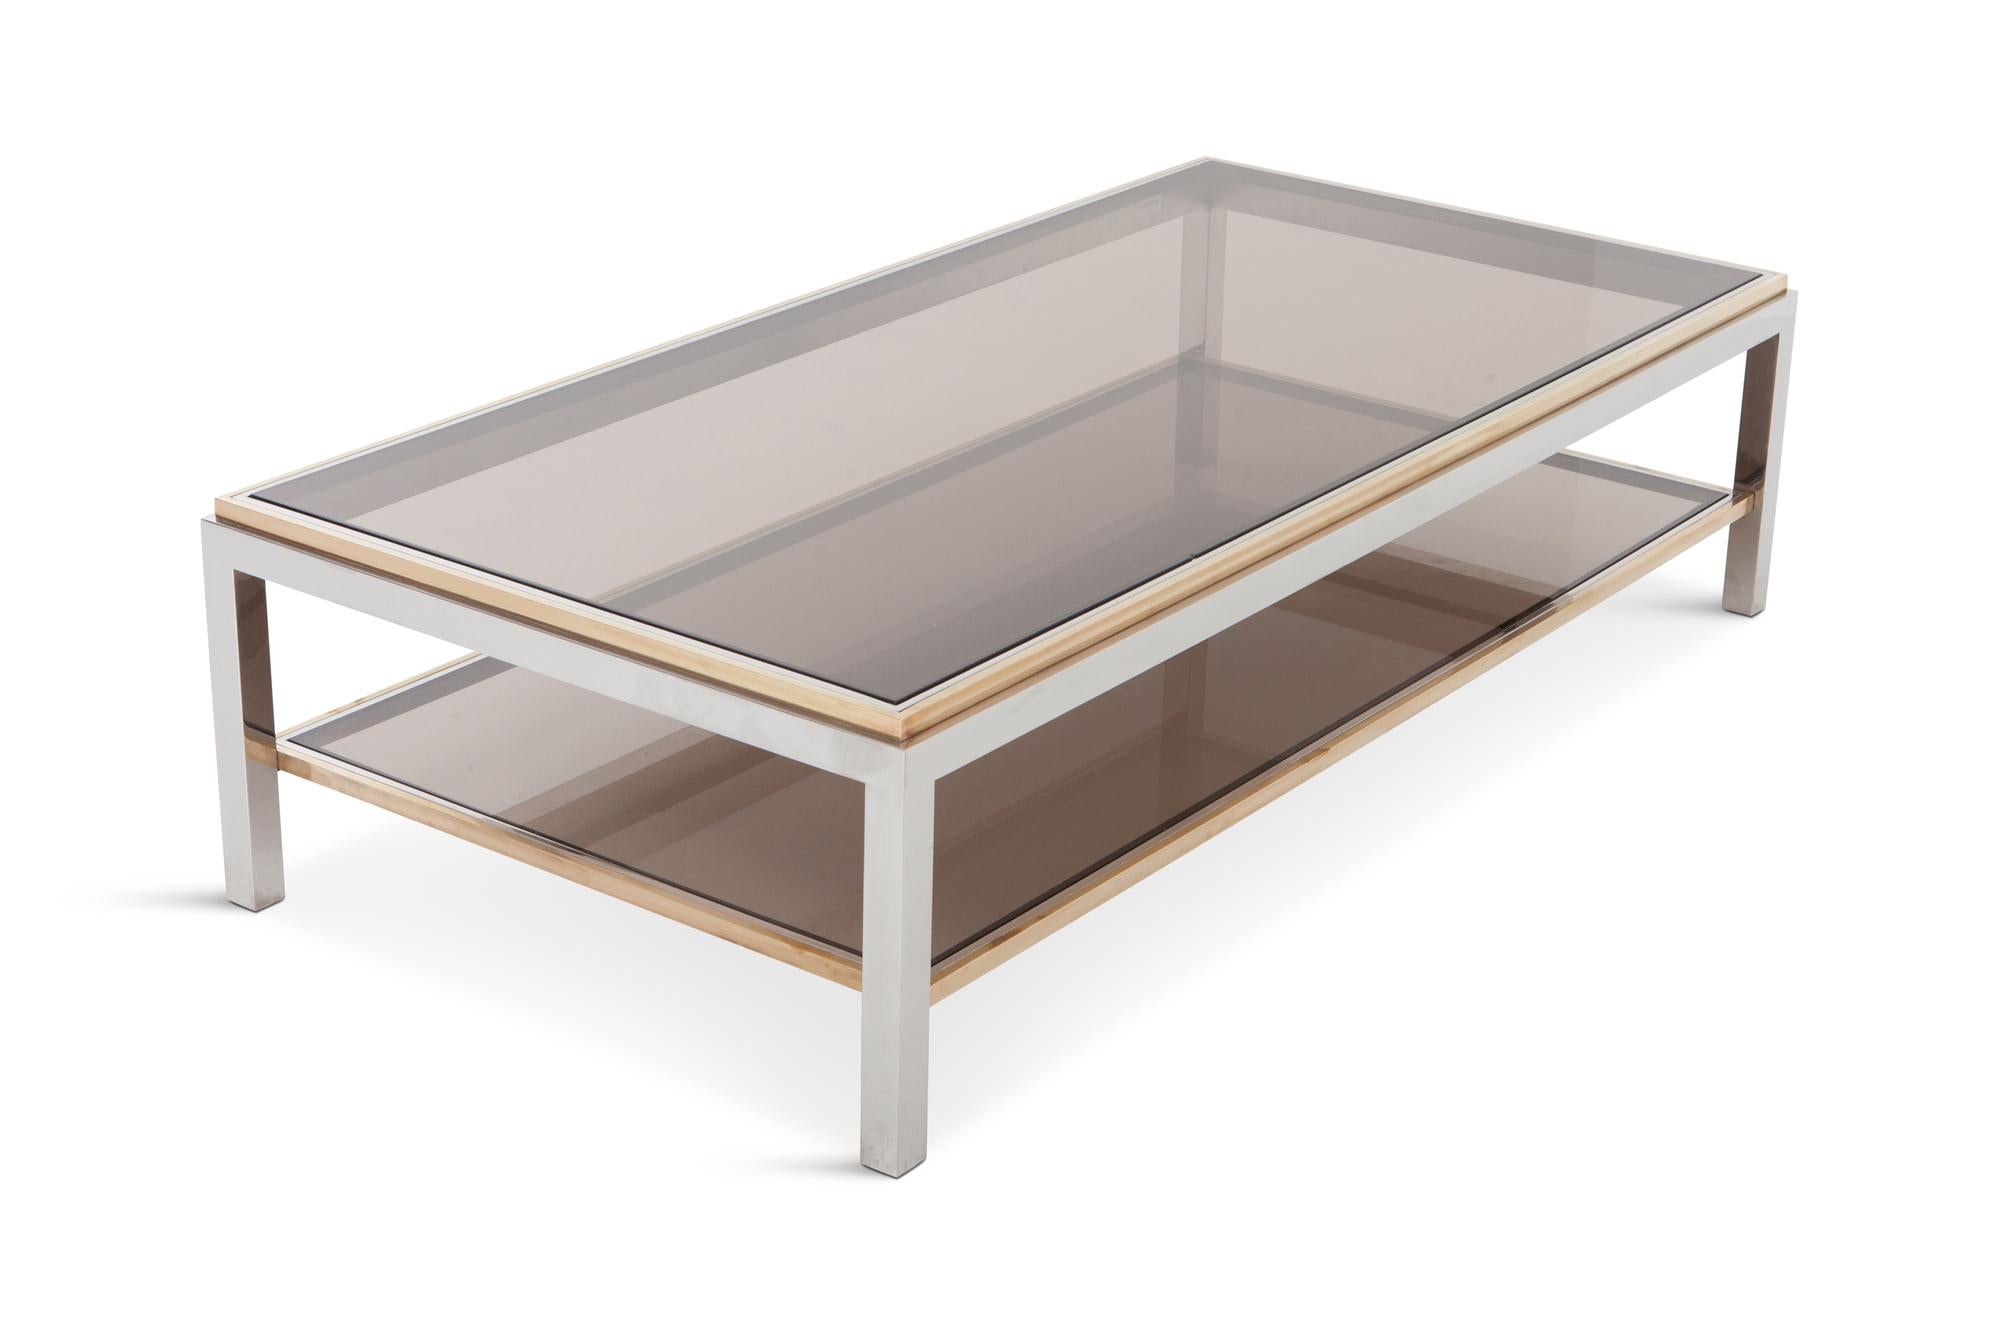 Brass, Chrome and smoked glass two tier coffee table, Willy Rizzo, 1970s. 

The chrome-plated steel frame is finished with brass edges, resulting in a stunning rich contrast. Both table top and second layer are fitted with dark smoked glass. Table